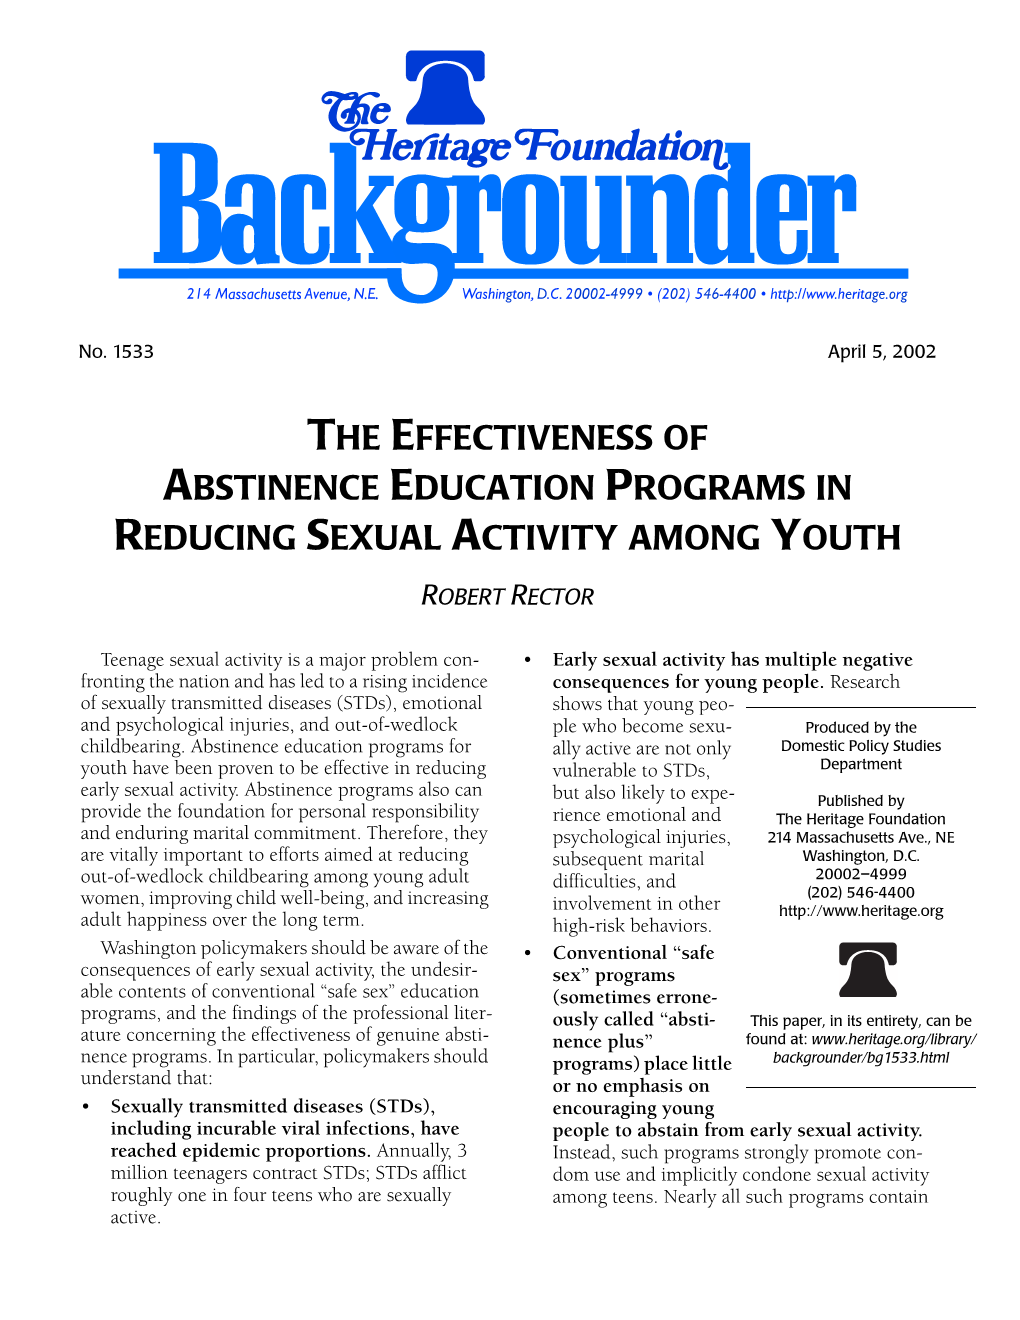 The Effectiveness of Abstinence Education Programs in Reducing Sexual Activity Among Youth